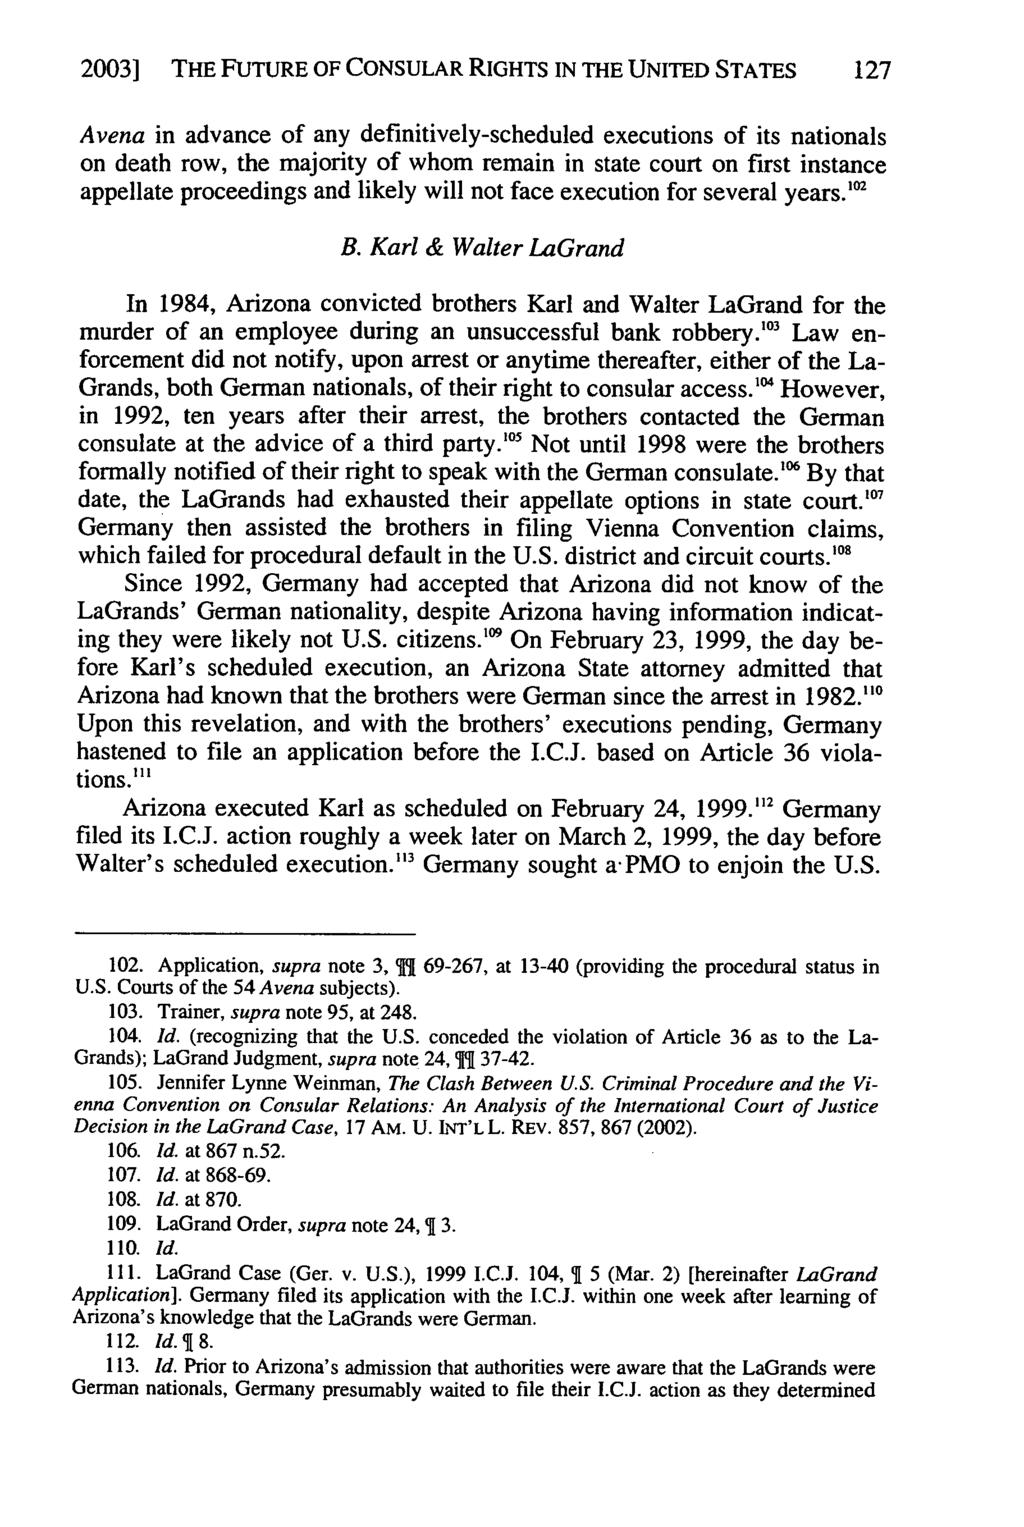 2003] Macina: THE Avena FUTURE & Other OF CONSULAR Mexican Nationals: RIGHTS The IN THE Litmus UNITED for LaGrand STATES & the Fut 127 Avena in advance of any definitively-scheduled executions of its